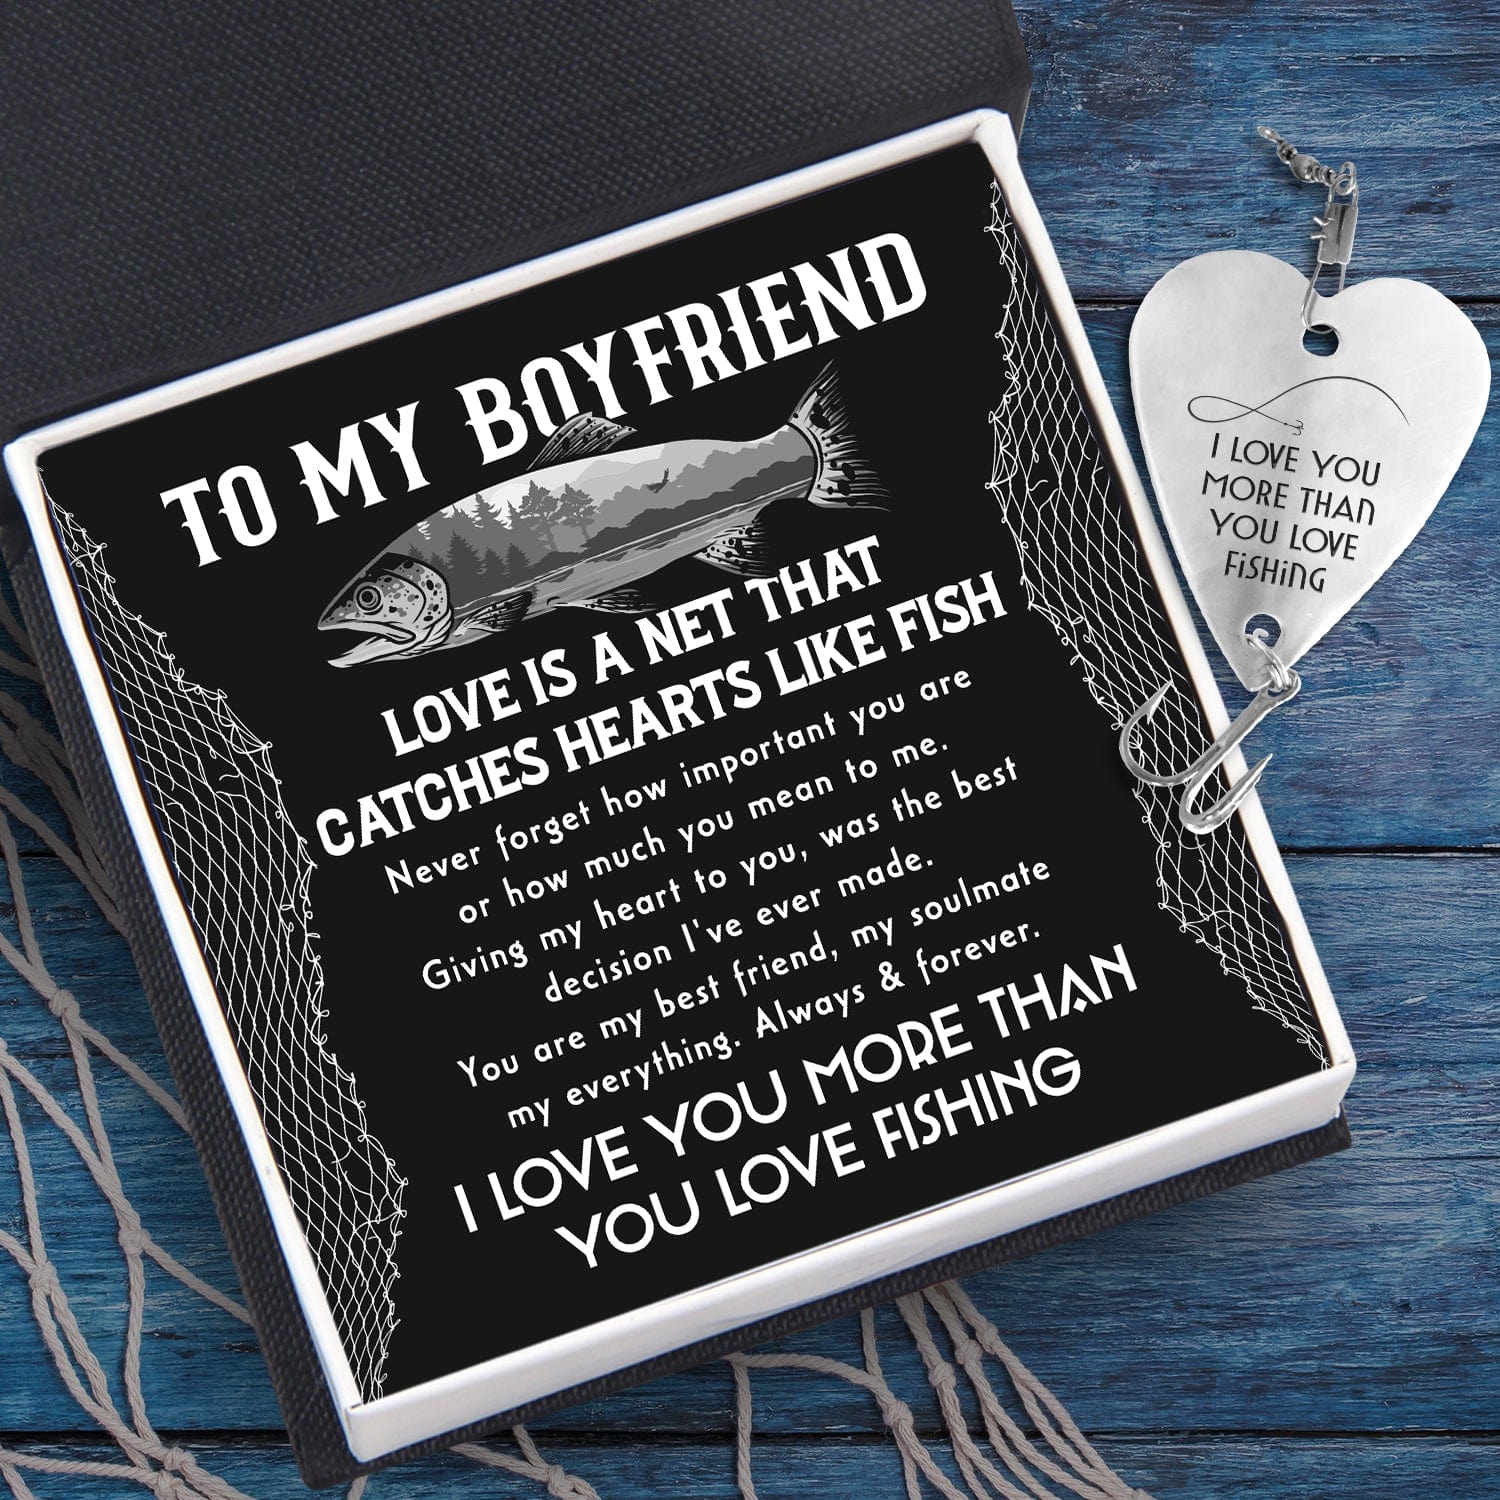 100 Best Fishing Gifts For Boyfriend - Wrapsify